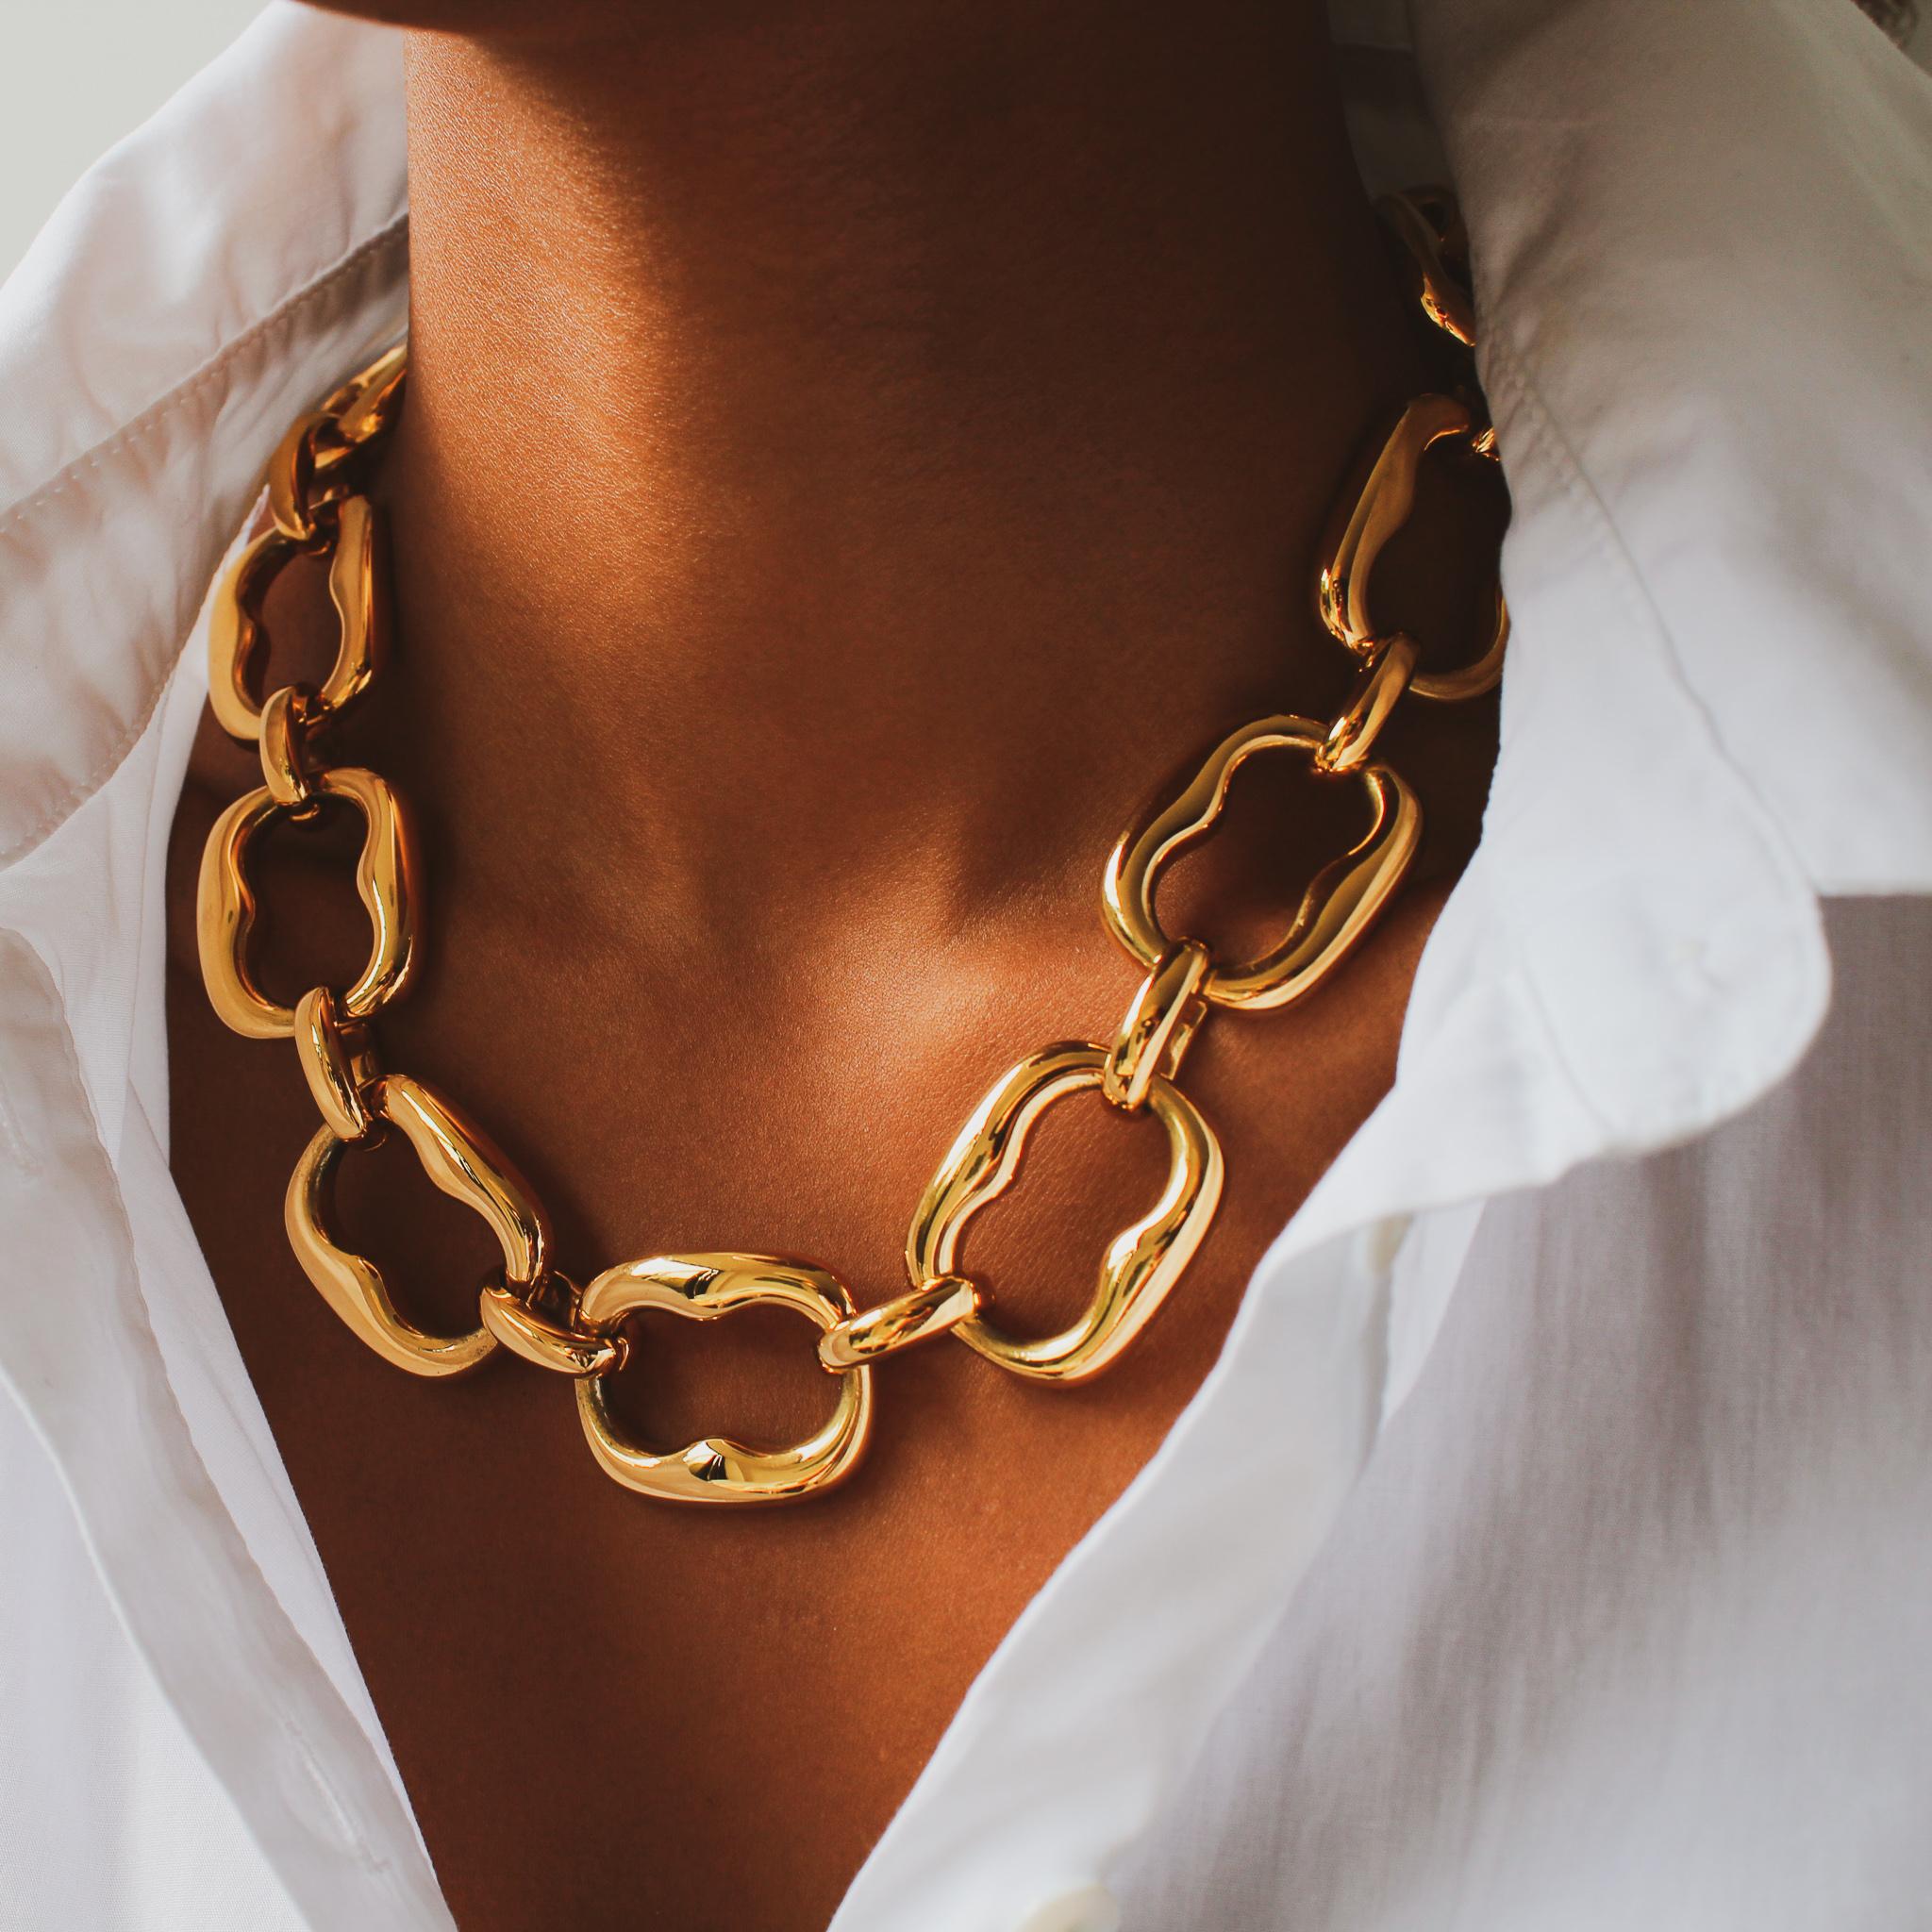 Vintage Gucci Necklace 1990s - 1992 Collection

Incredible and rare chunky link necklace from the legendary House of Gucci.  This amazing piece comprises of chunky oversized chain links crafted from high quality gold plated metal. Made in Italy for